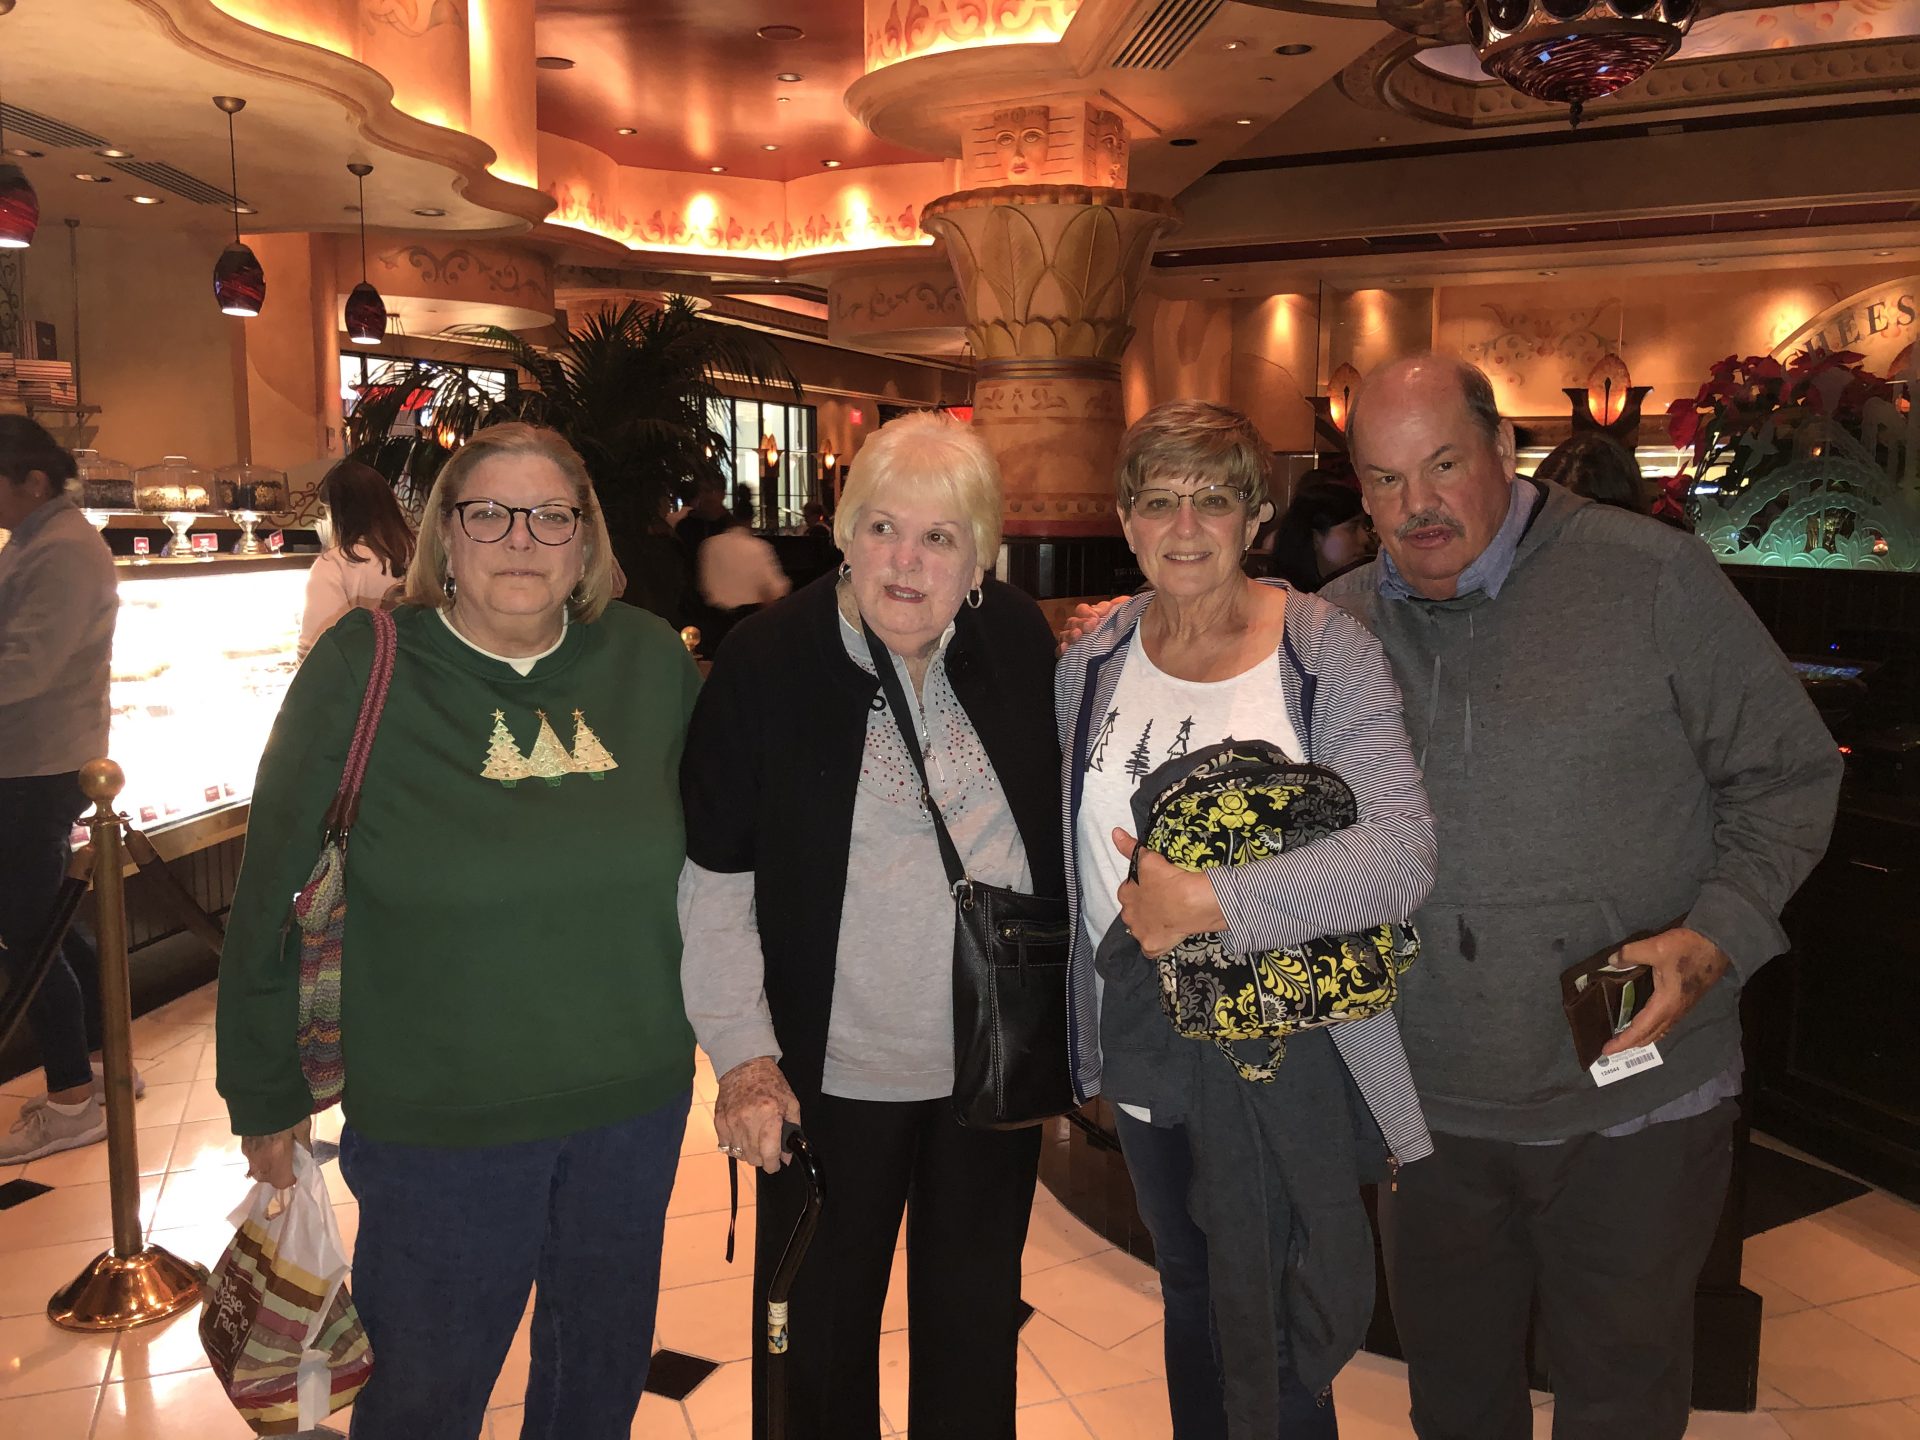 December 2019. Dinner at Cheesecake Factory. Love you, Aunt Billie❤️